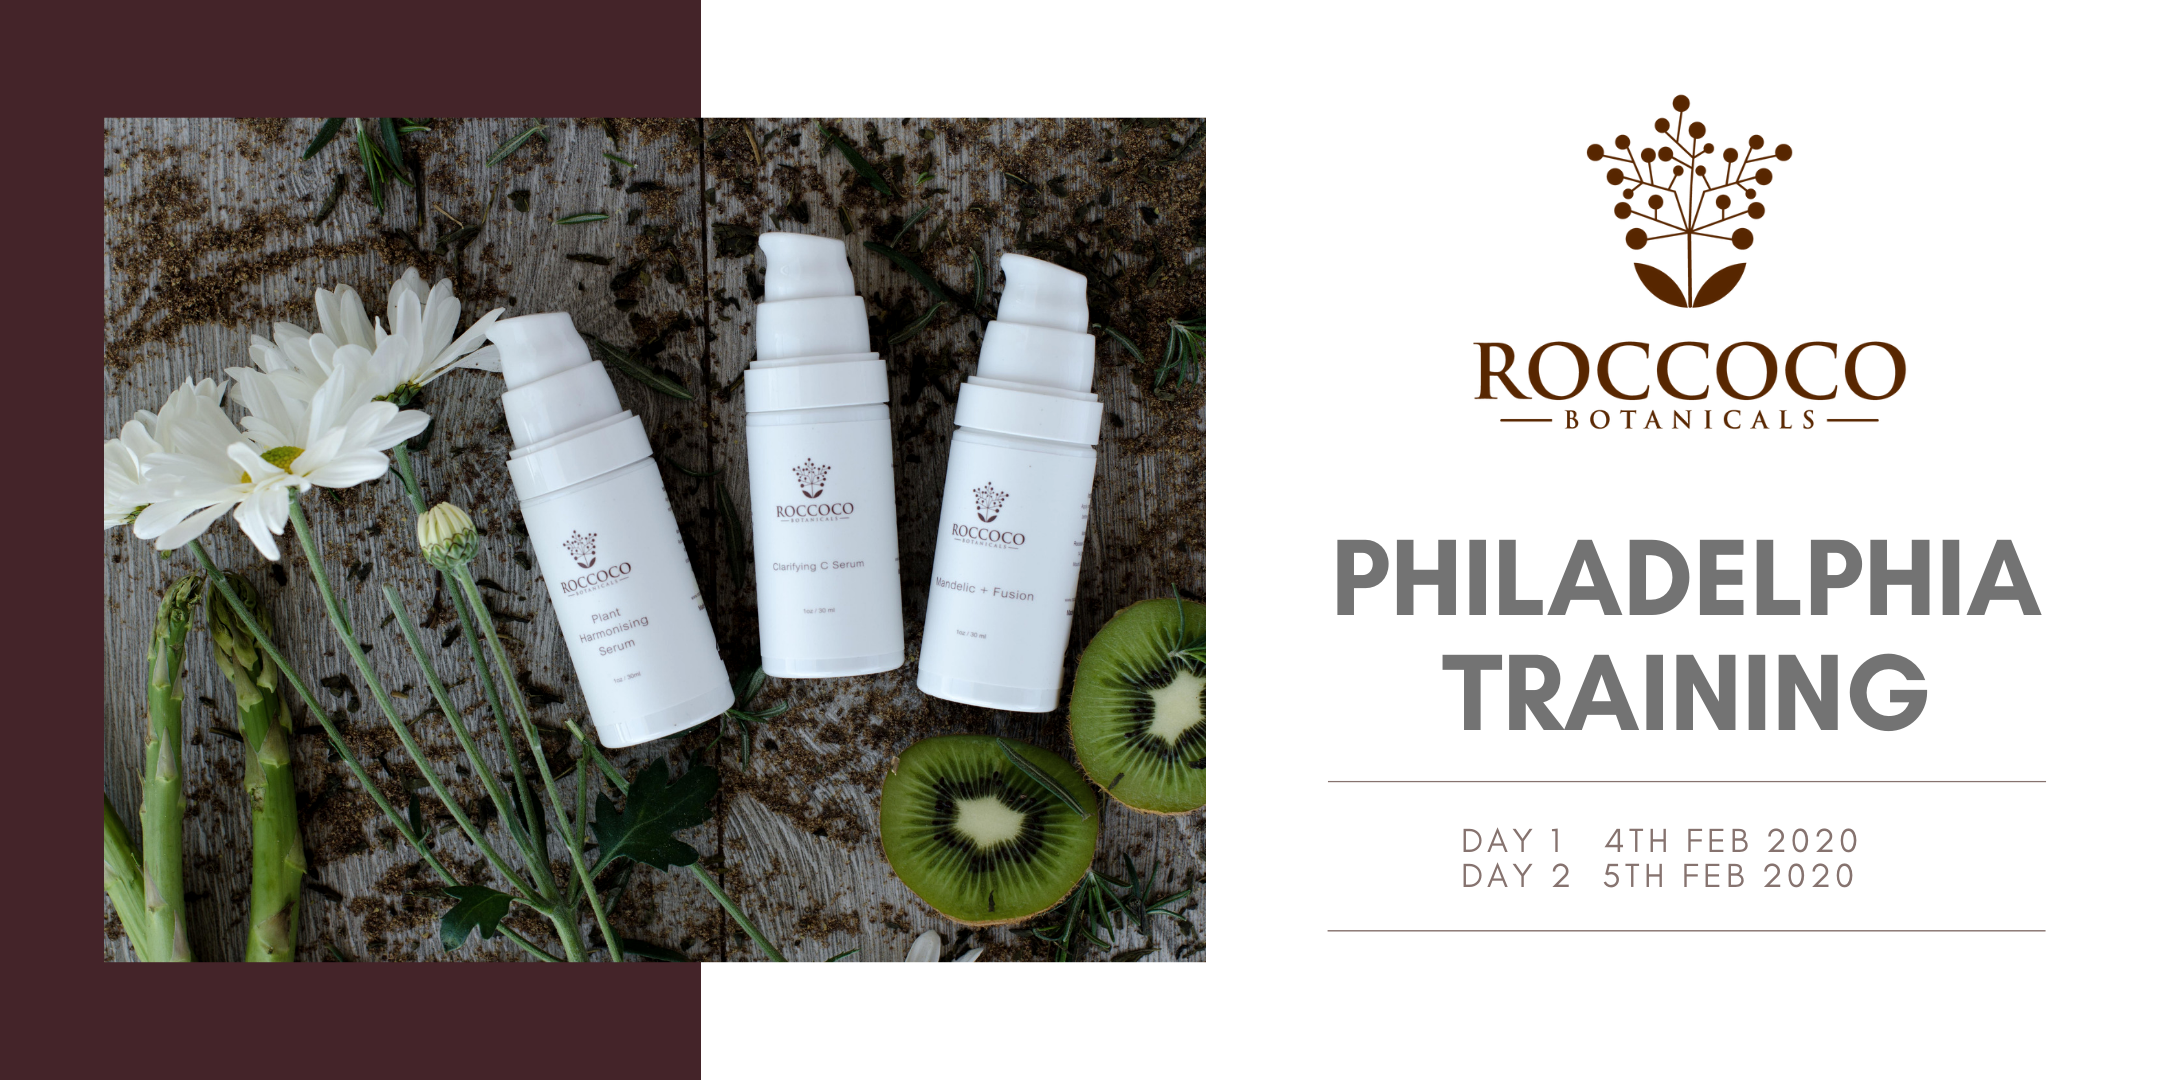 Roccoco Philadelphia, PA Product Knowledge Day 1- Acne, Rosacea & Barrier Repair